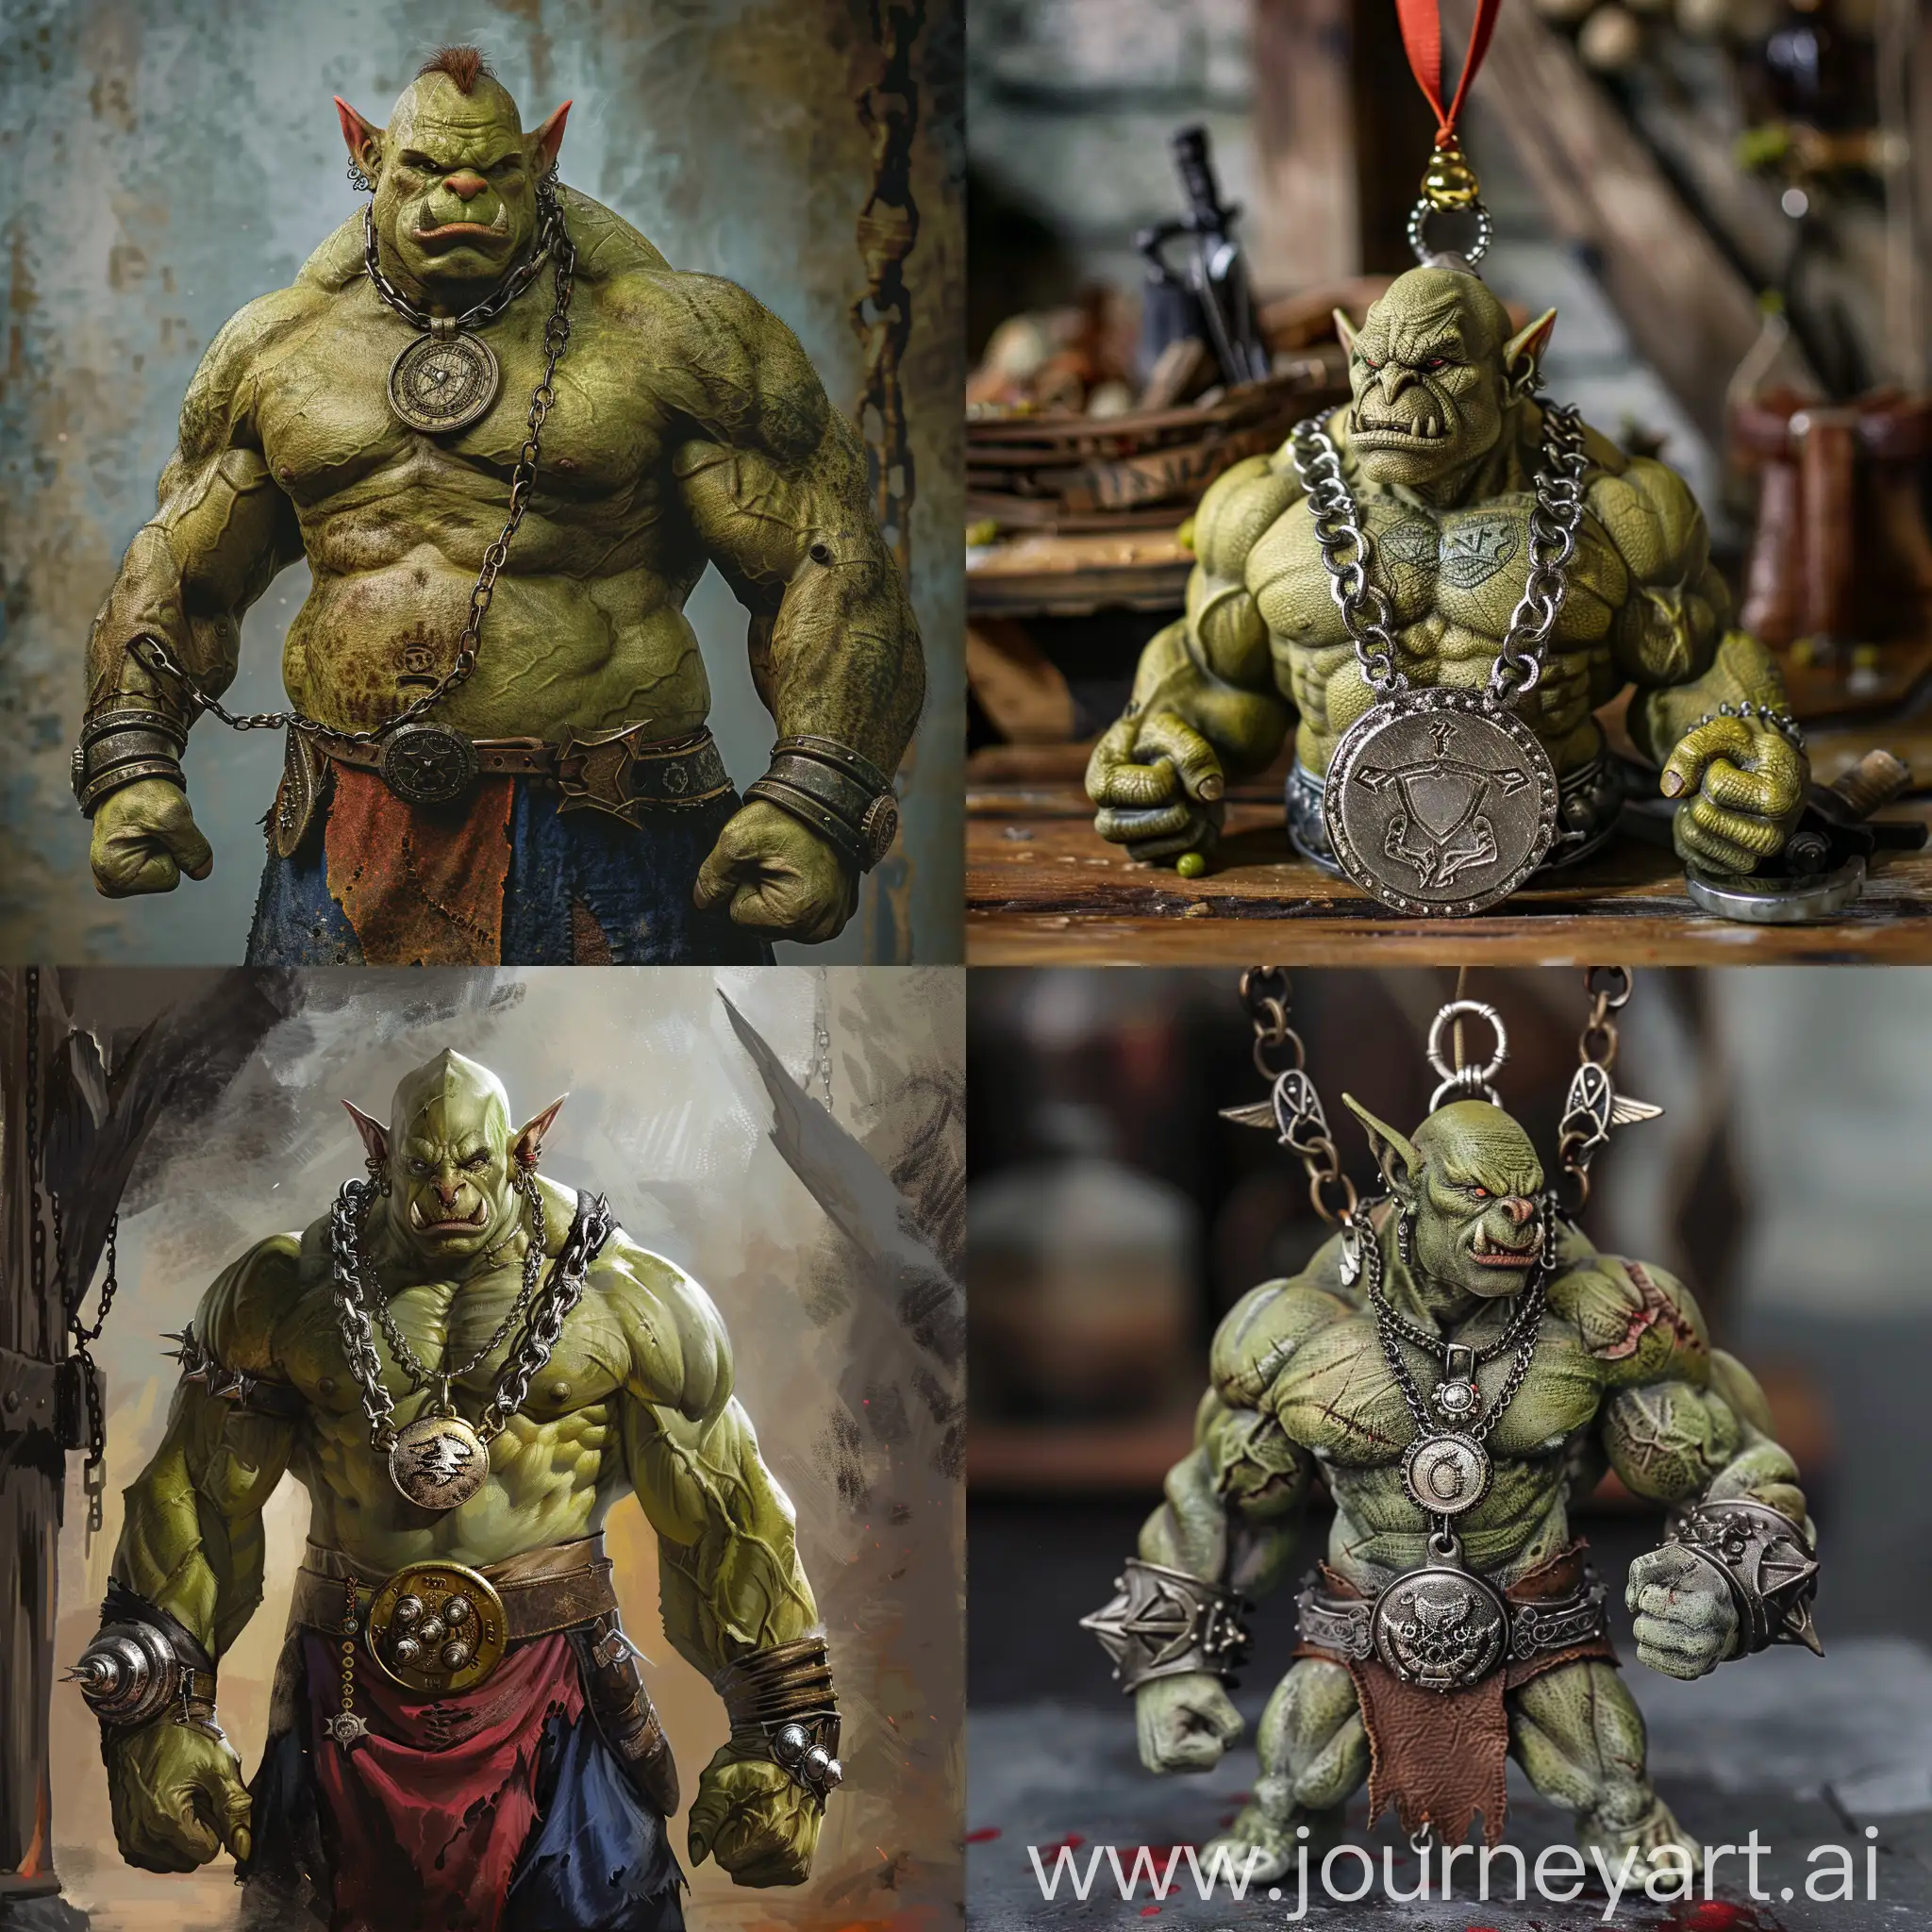 Muscular-Orc-Bodybuilder-Triumphantly-Receives-Medal